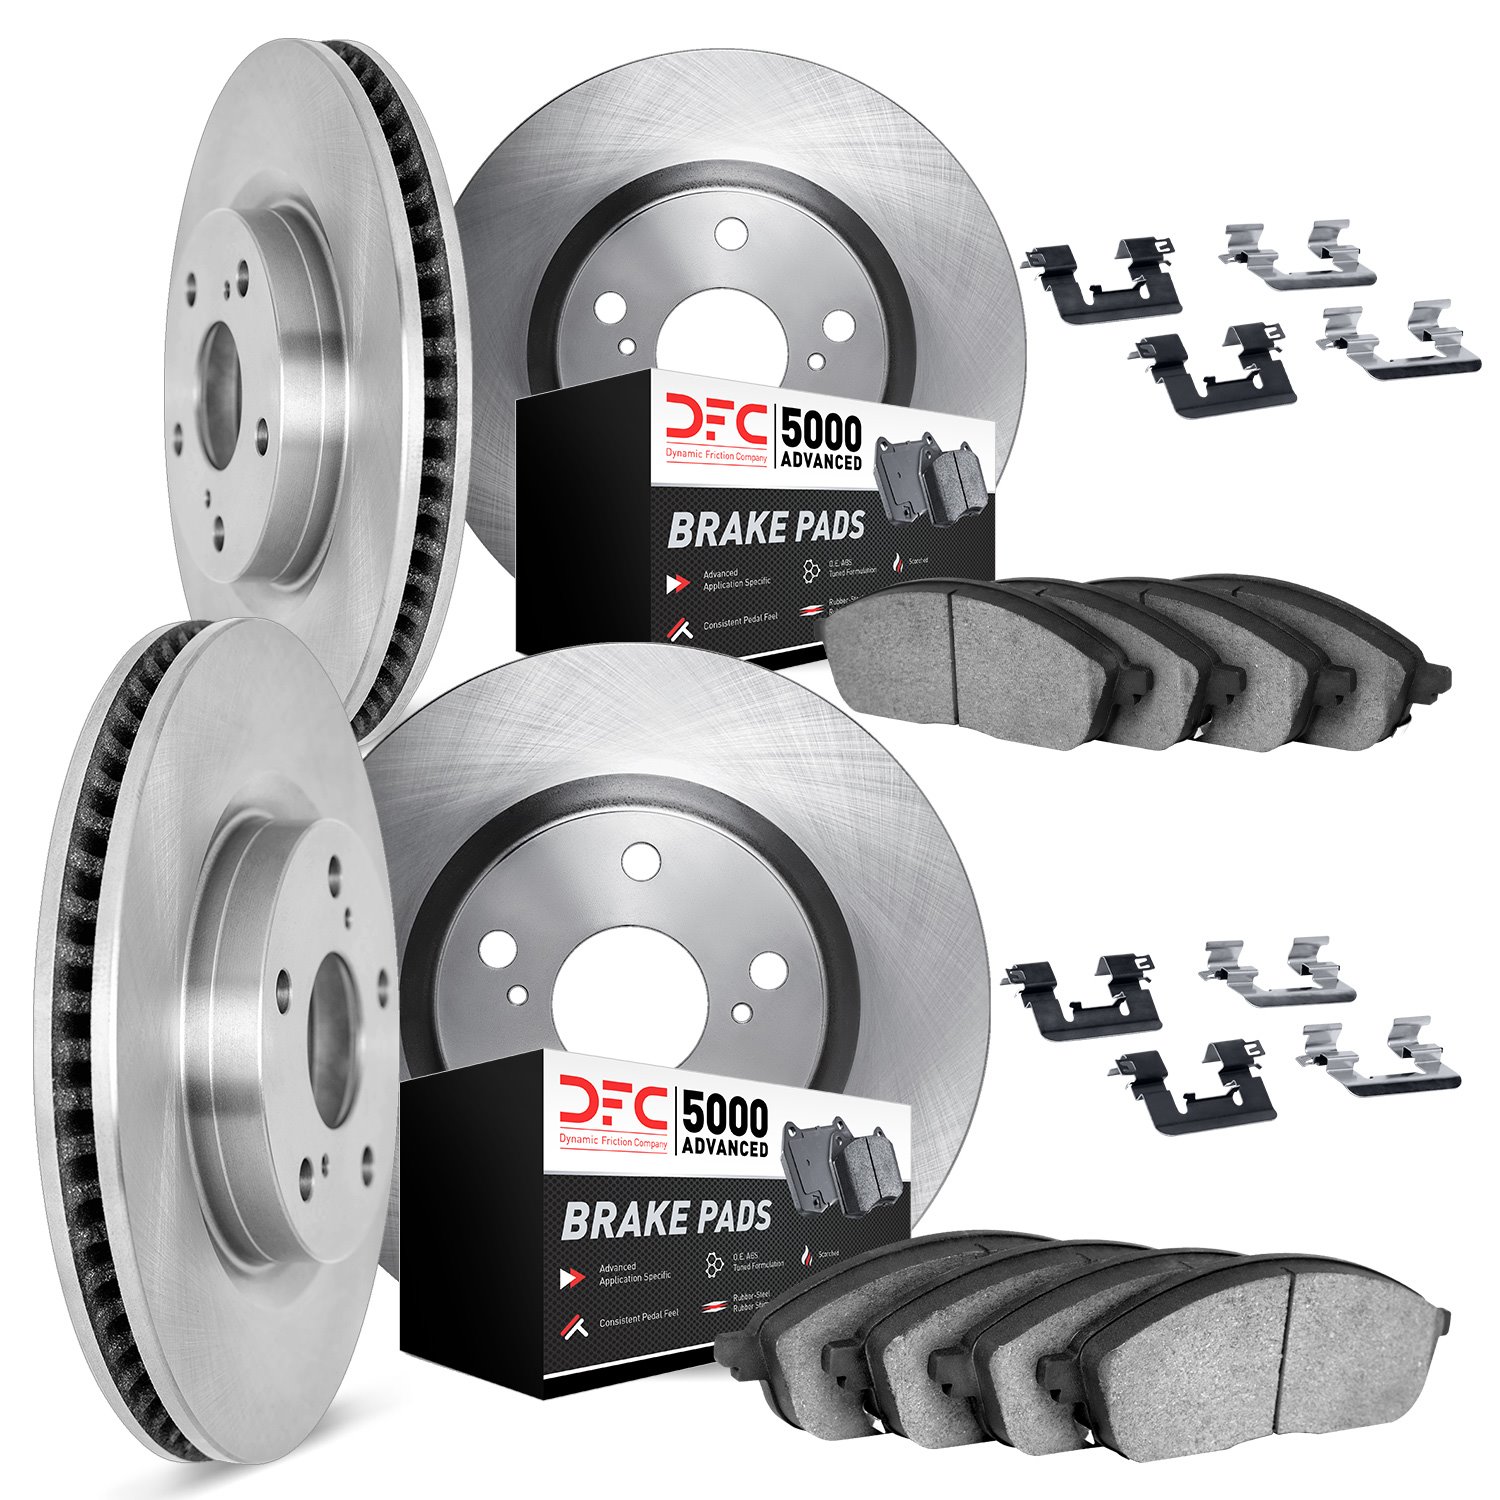 6514-01004 Brake Rotors w/5000 Advanced Brake Pads Kit with Hardware, 2009-2017 Suzuki, Position: Front and Rear